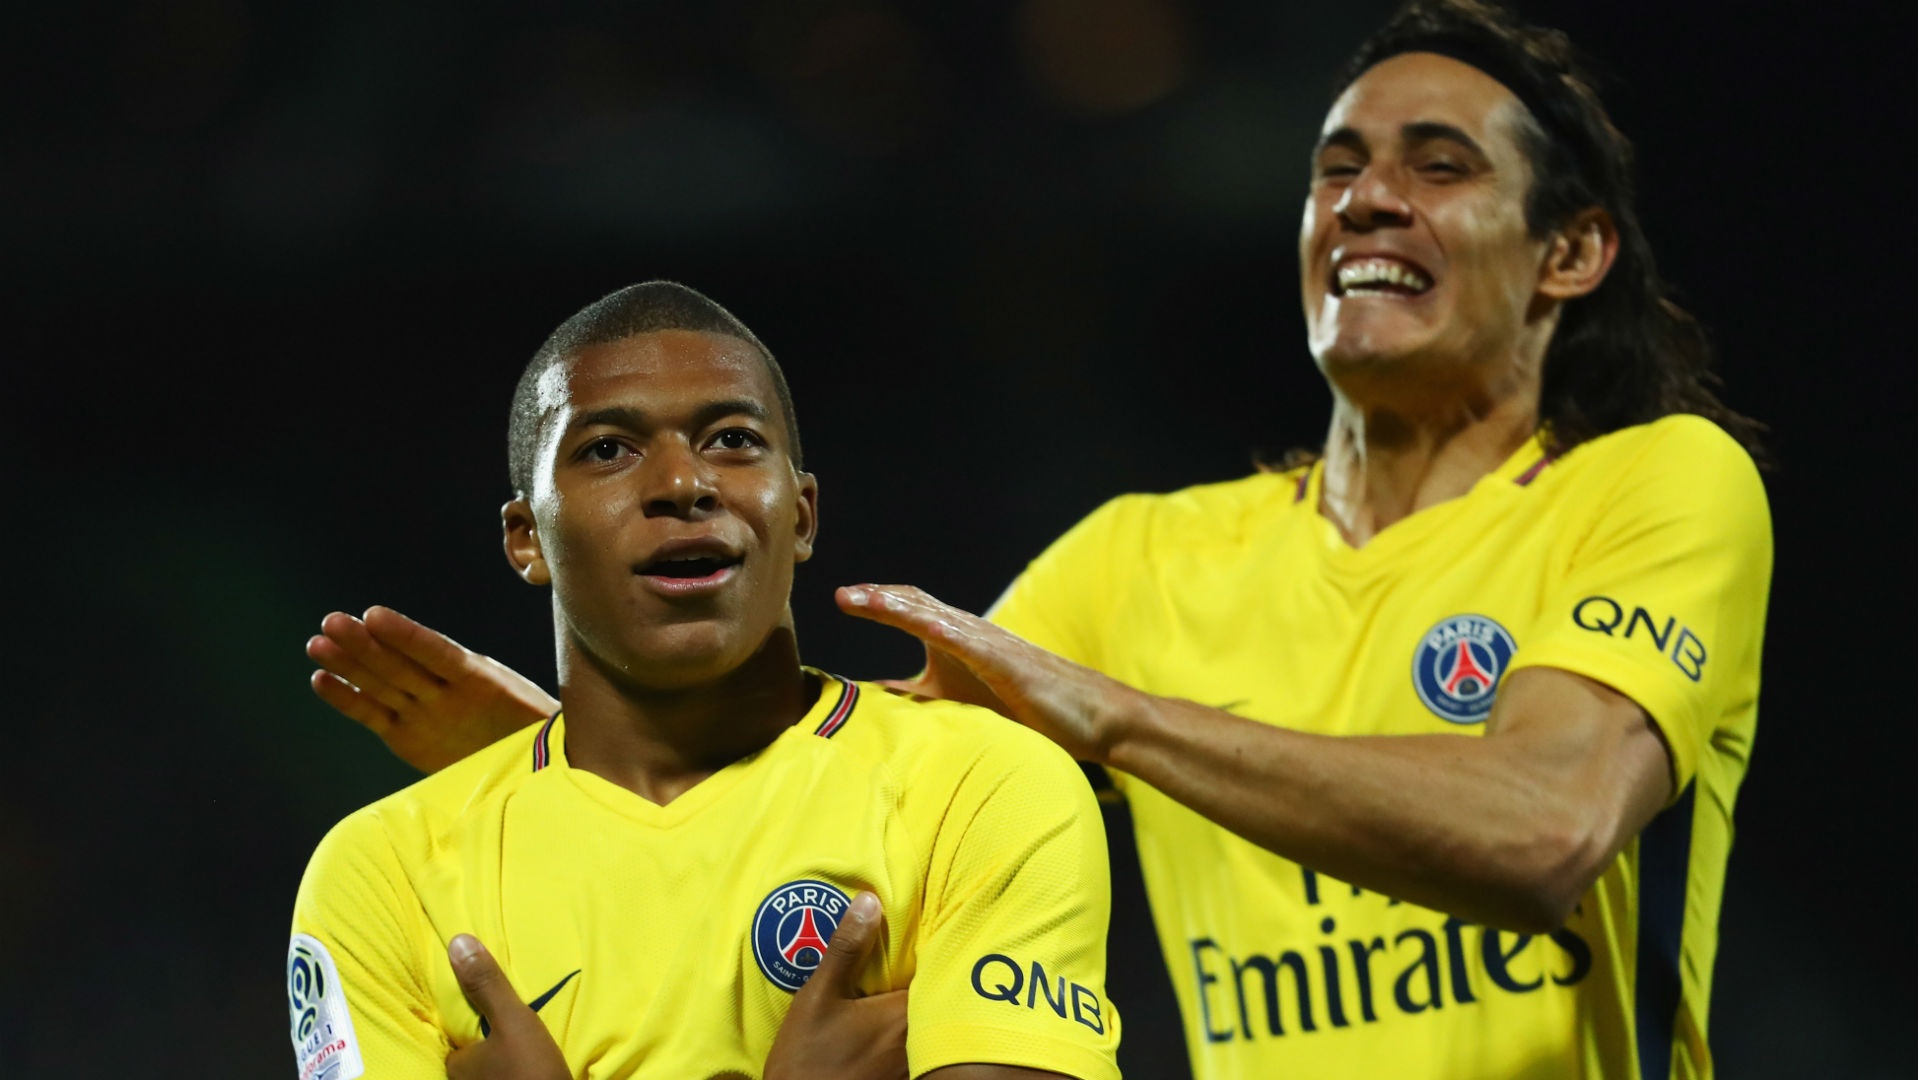 Emery lauds Mbappe after goalscoring debut